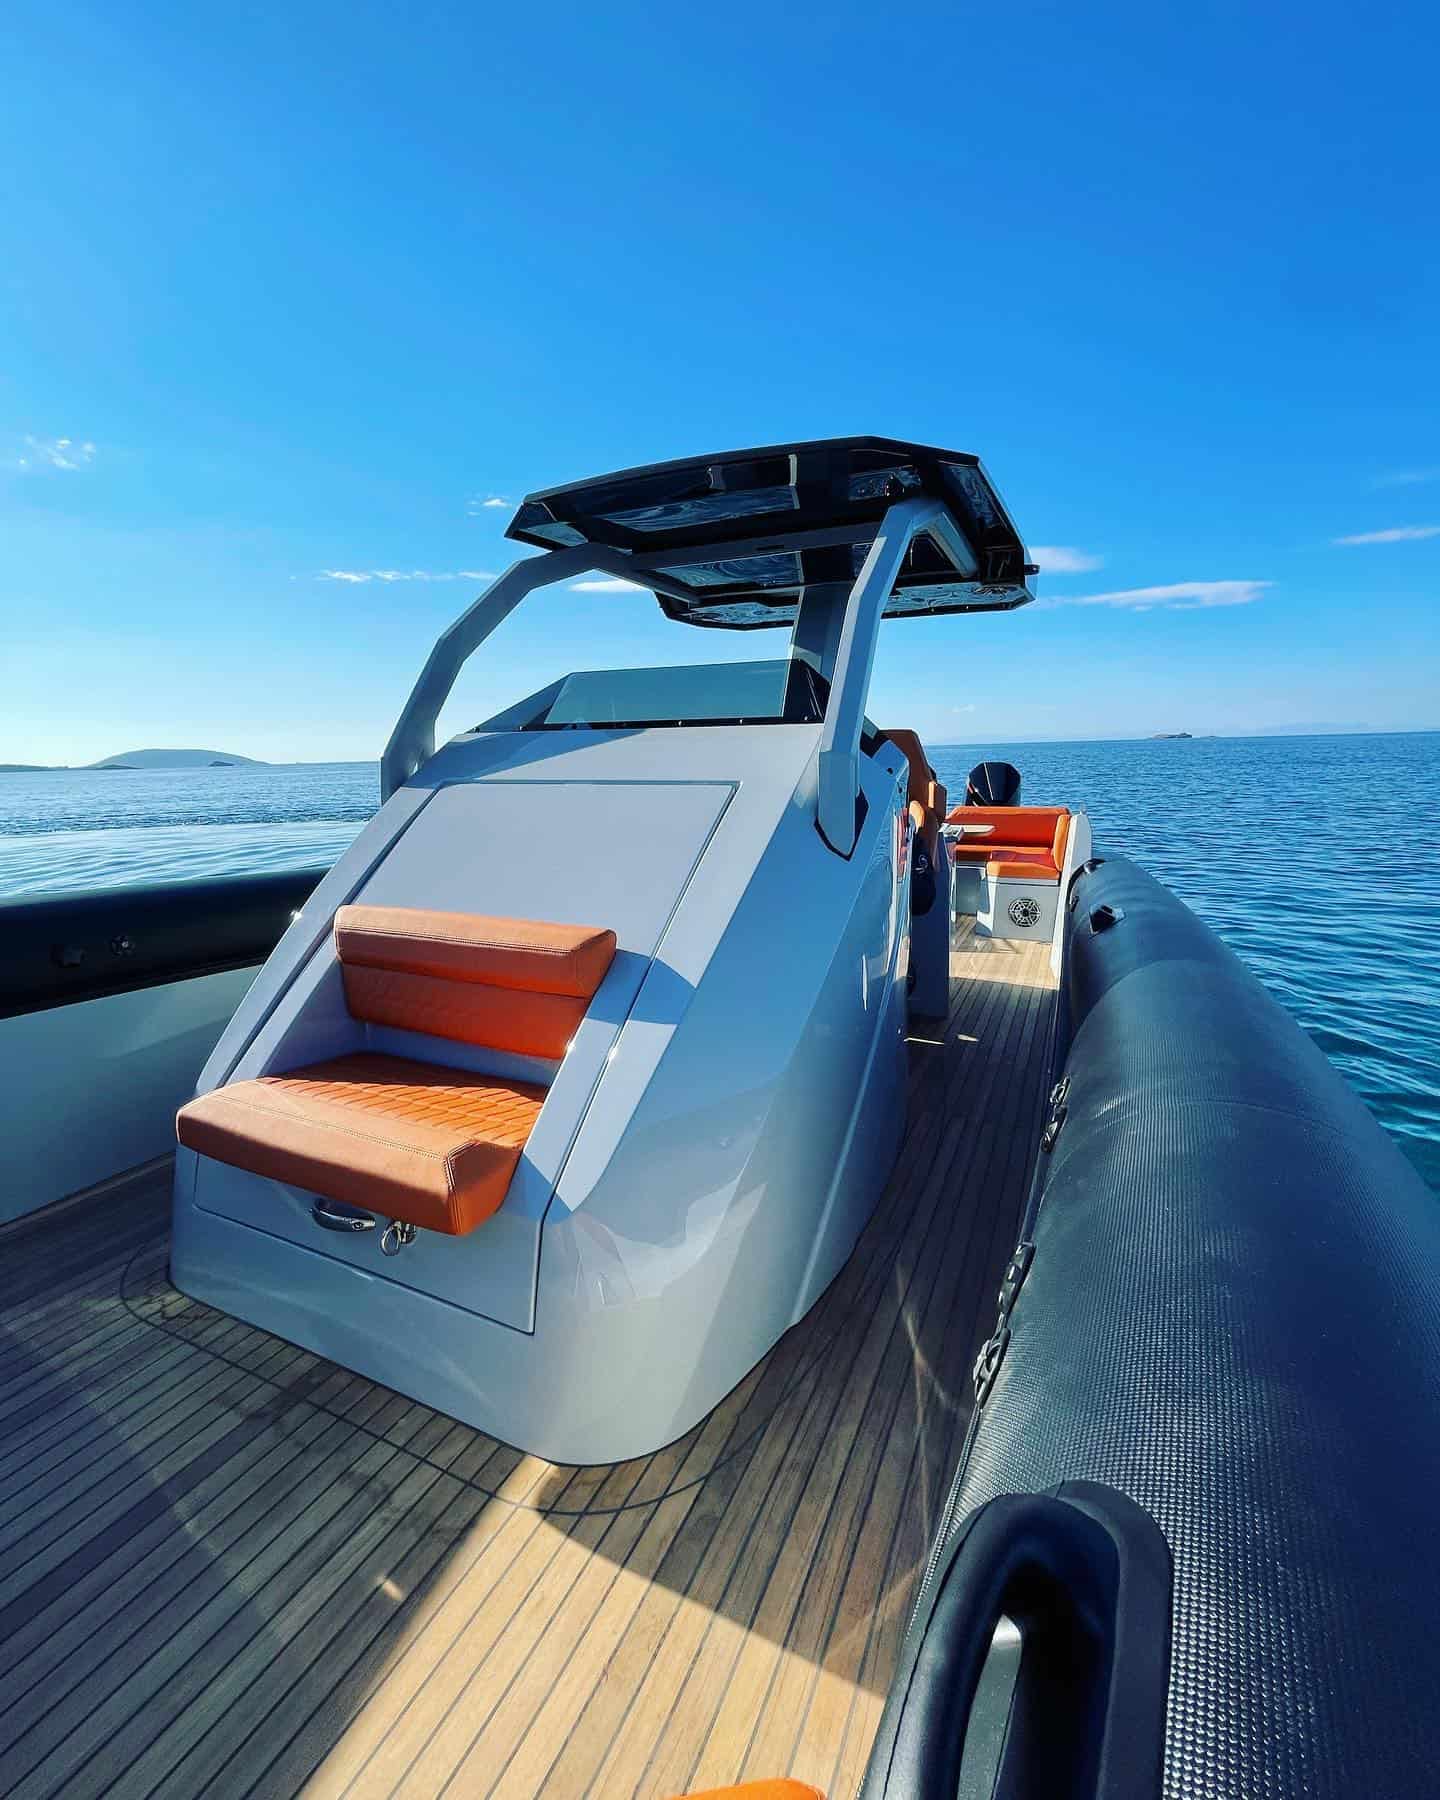 The All-New BSK Skipper 38NC RIB @ RIBs ONLY - Home of the Rigid Inflatable Boat